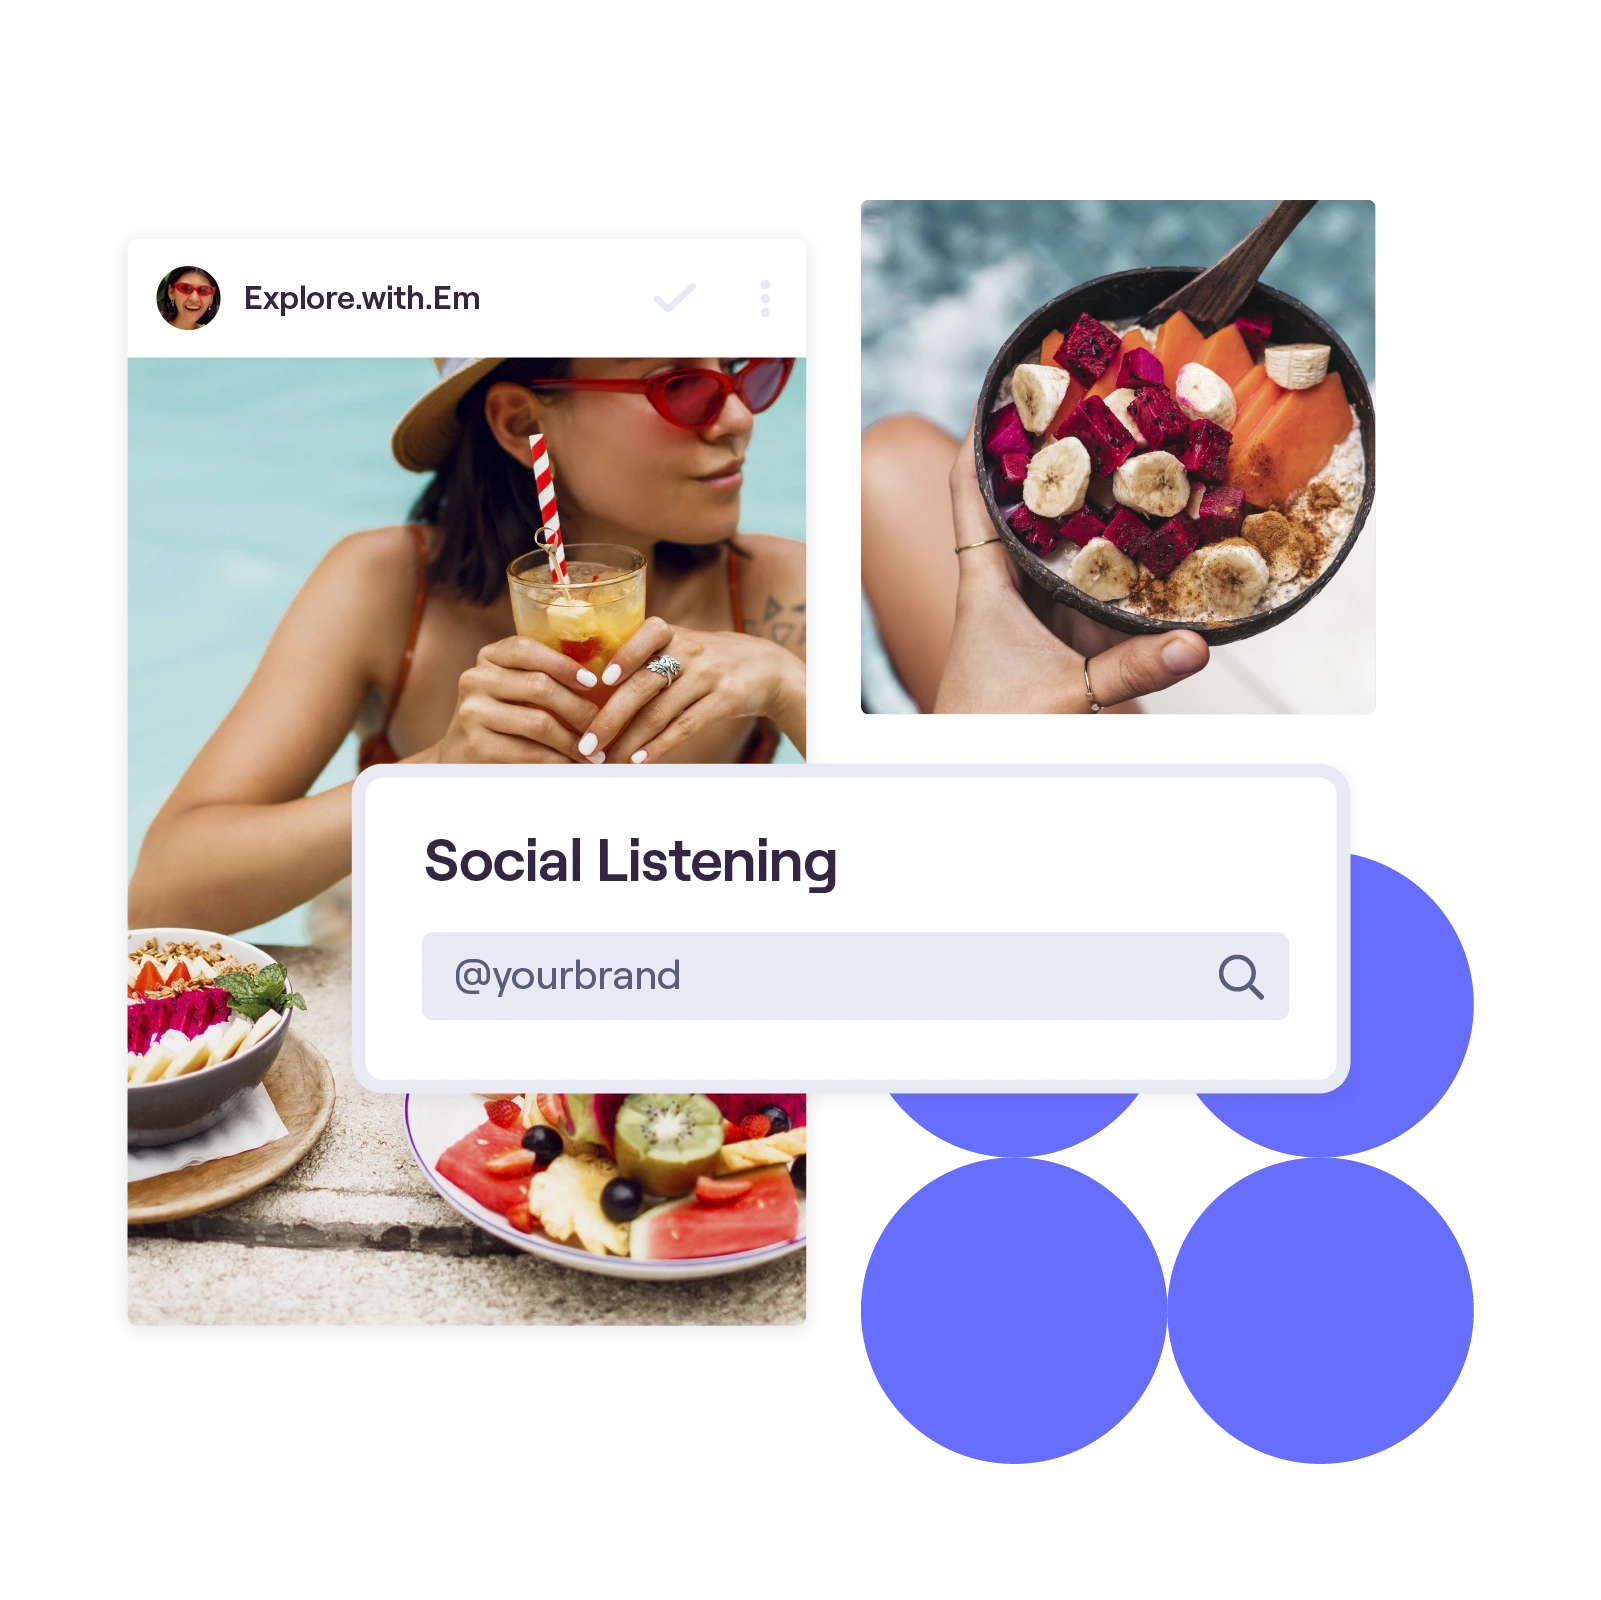 stylized image of an influencer reviewing a meal symbolizing social listening capabilities